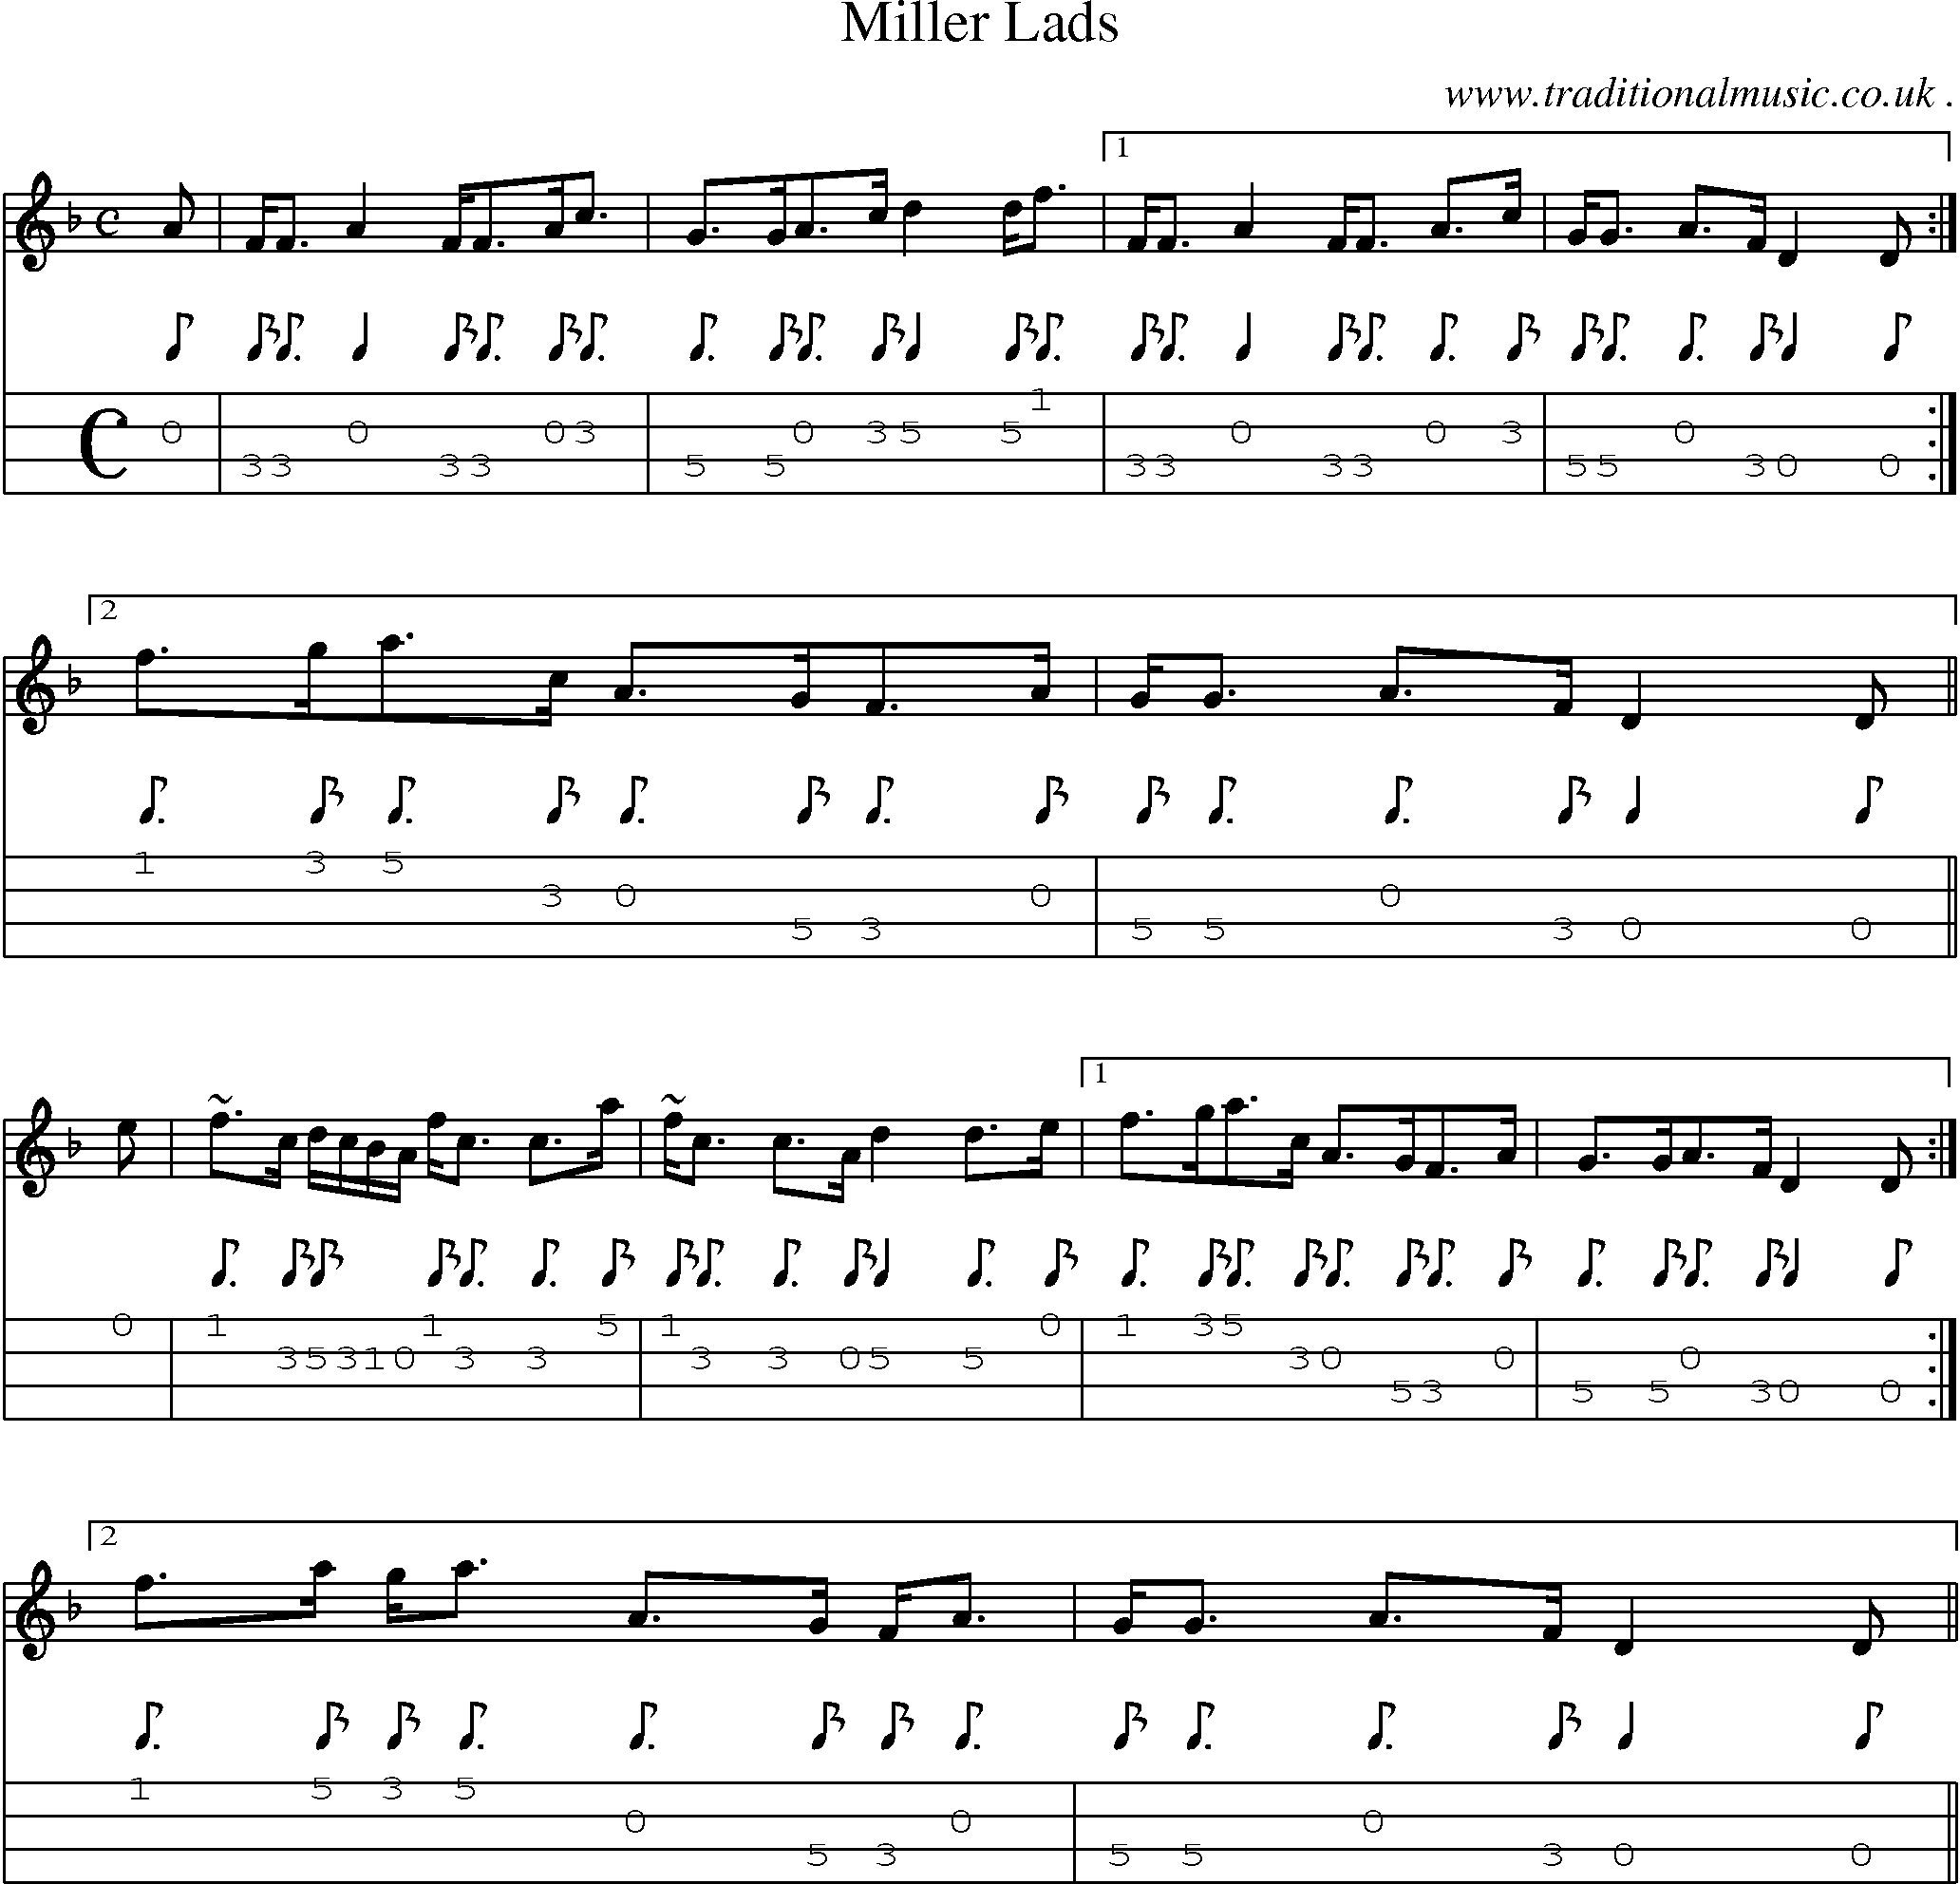 Sheet-music  score, Chords and Mandolin Tabs for Miller Lads